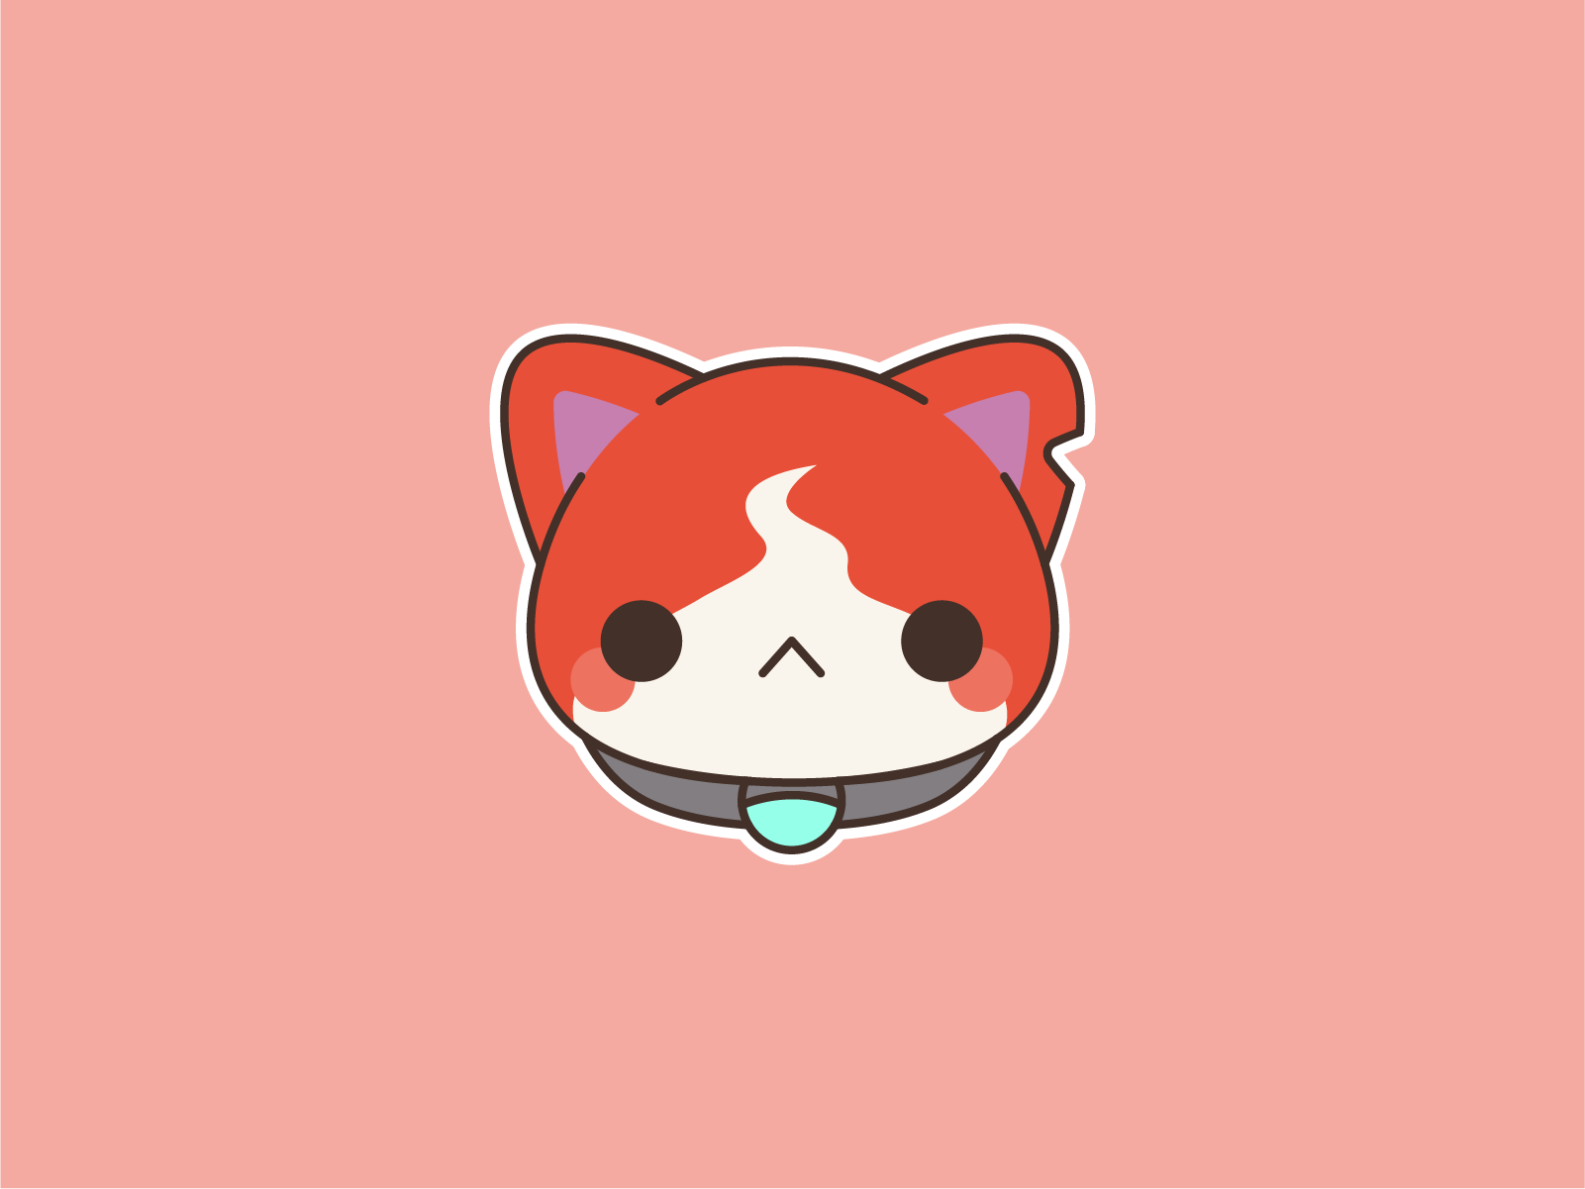 Some wallpapers i made : r/yokaiwatch